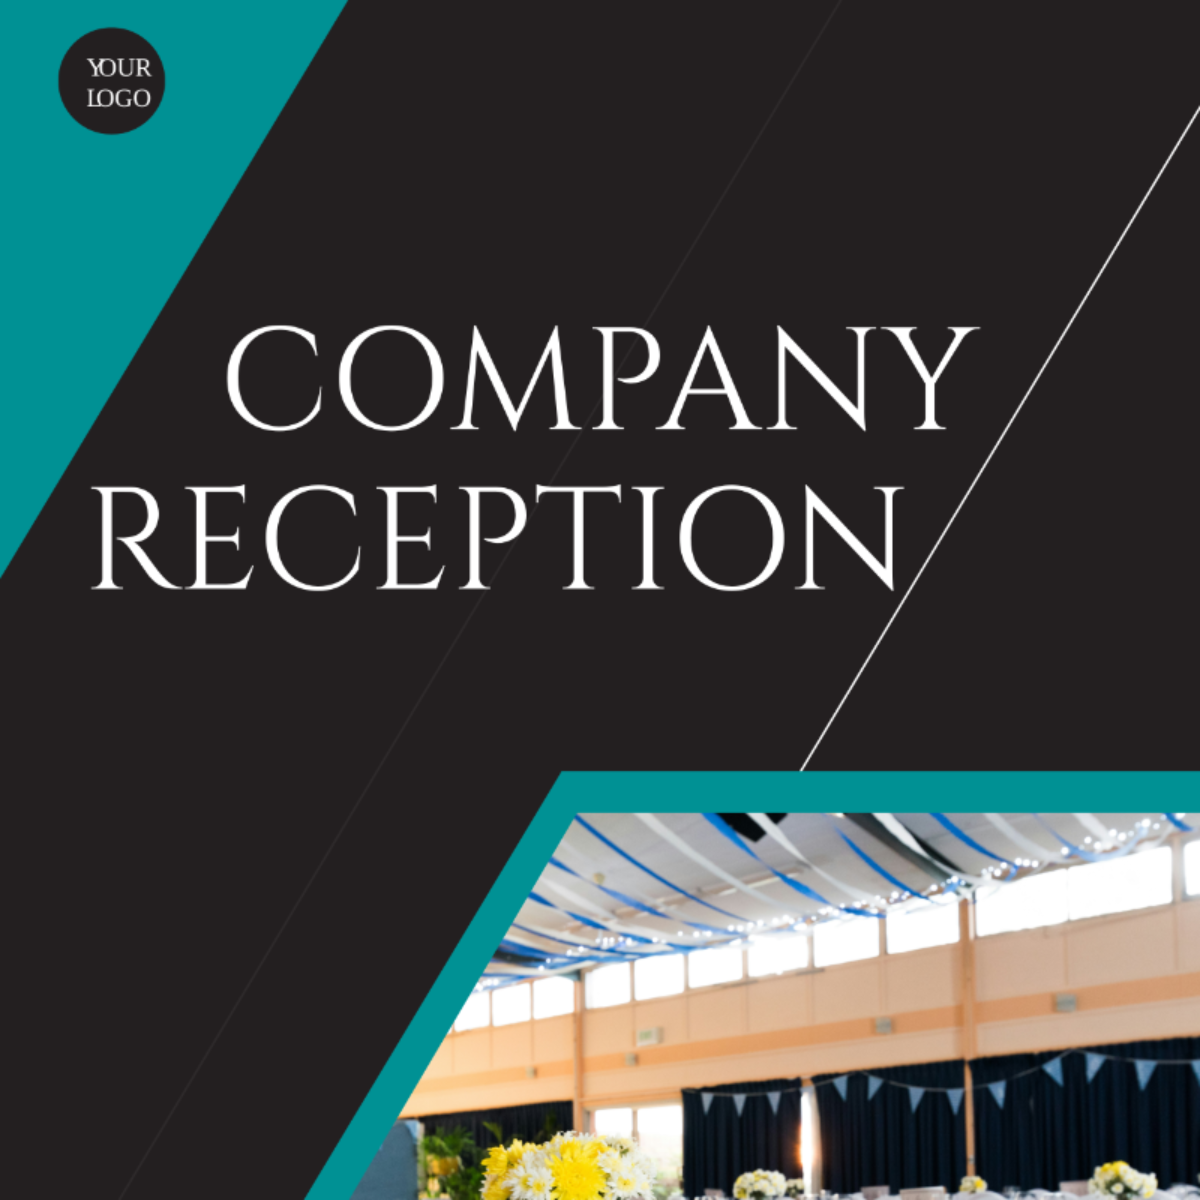 Reception Itinerary Template